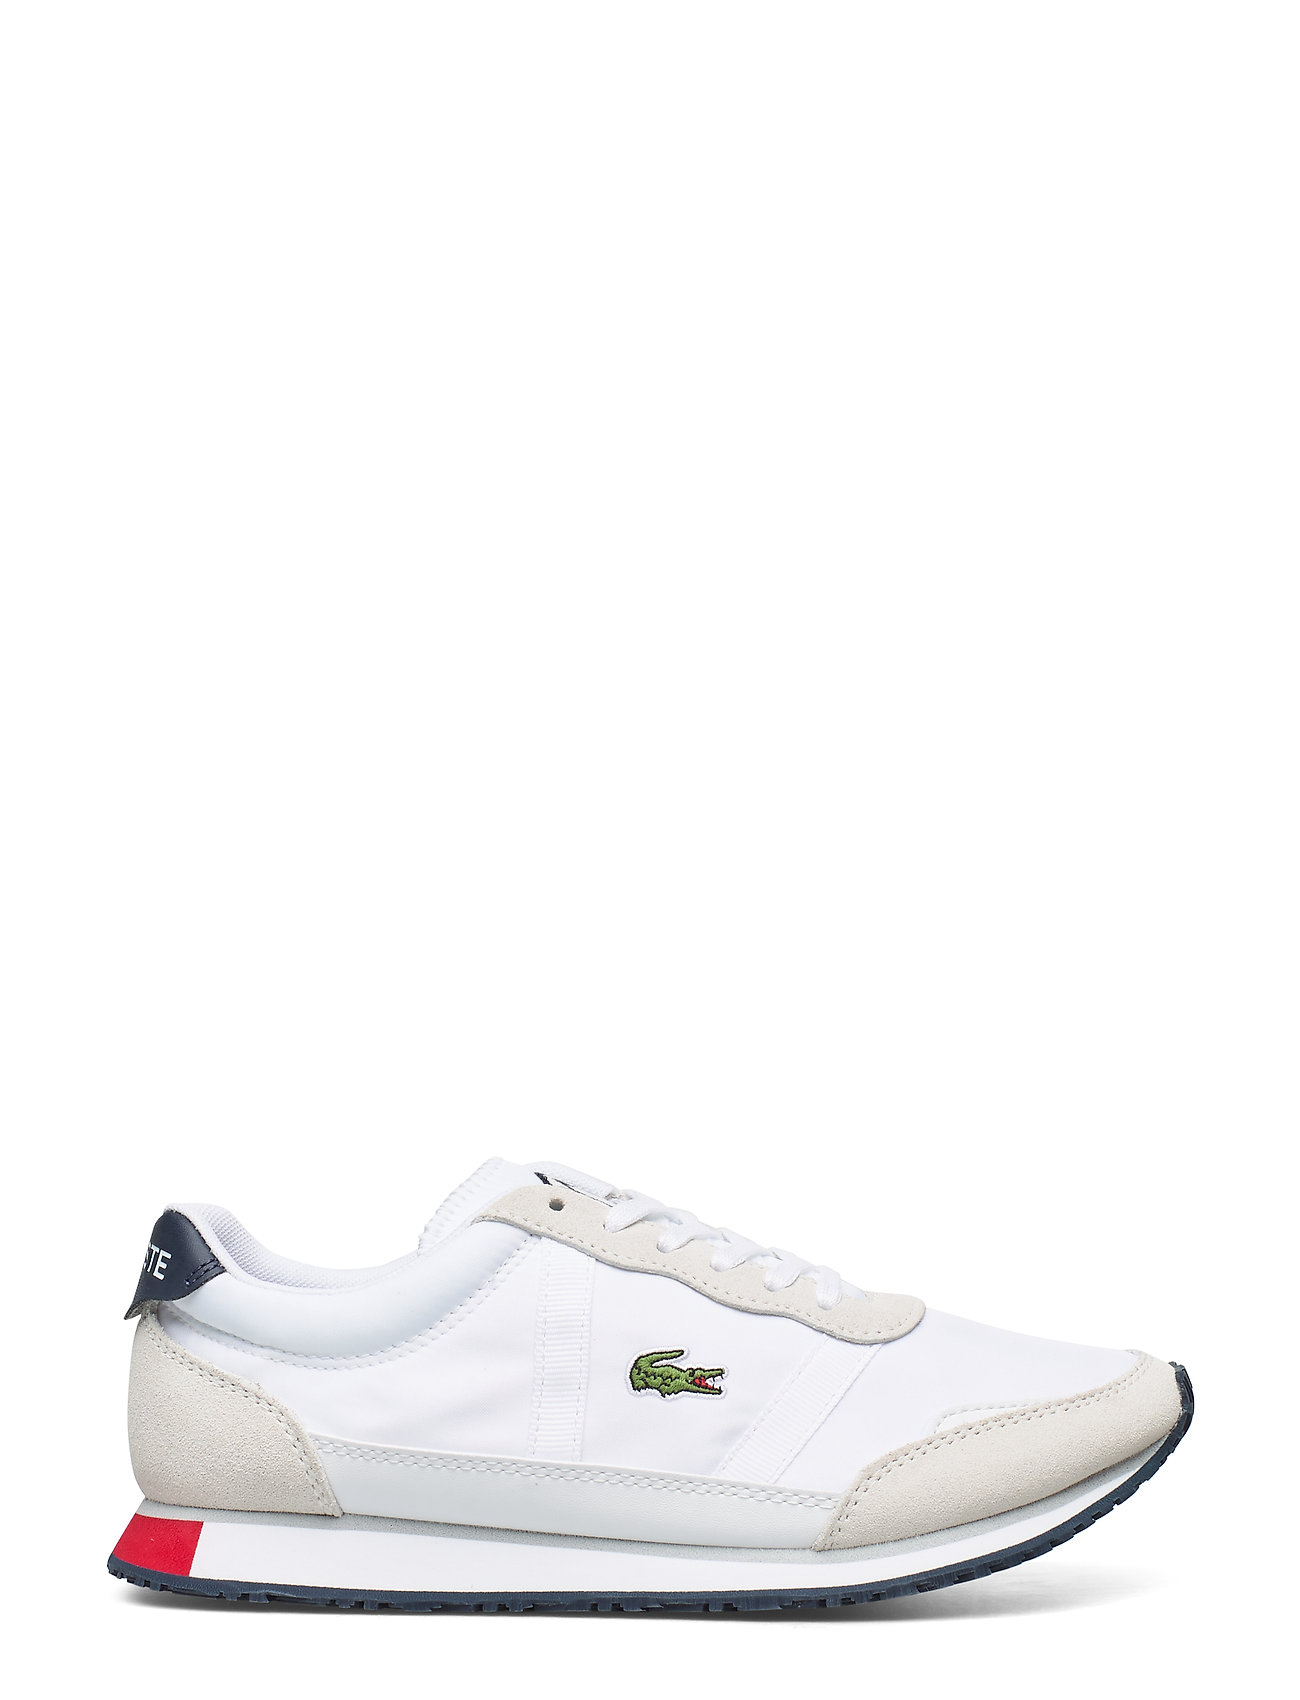 WHT/NVY/RED TXT/SDE Lacoste Partner Sfa Low-top Sneakers Hvid Lacoste Shoes sneakers - Pashion.dk